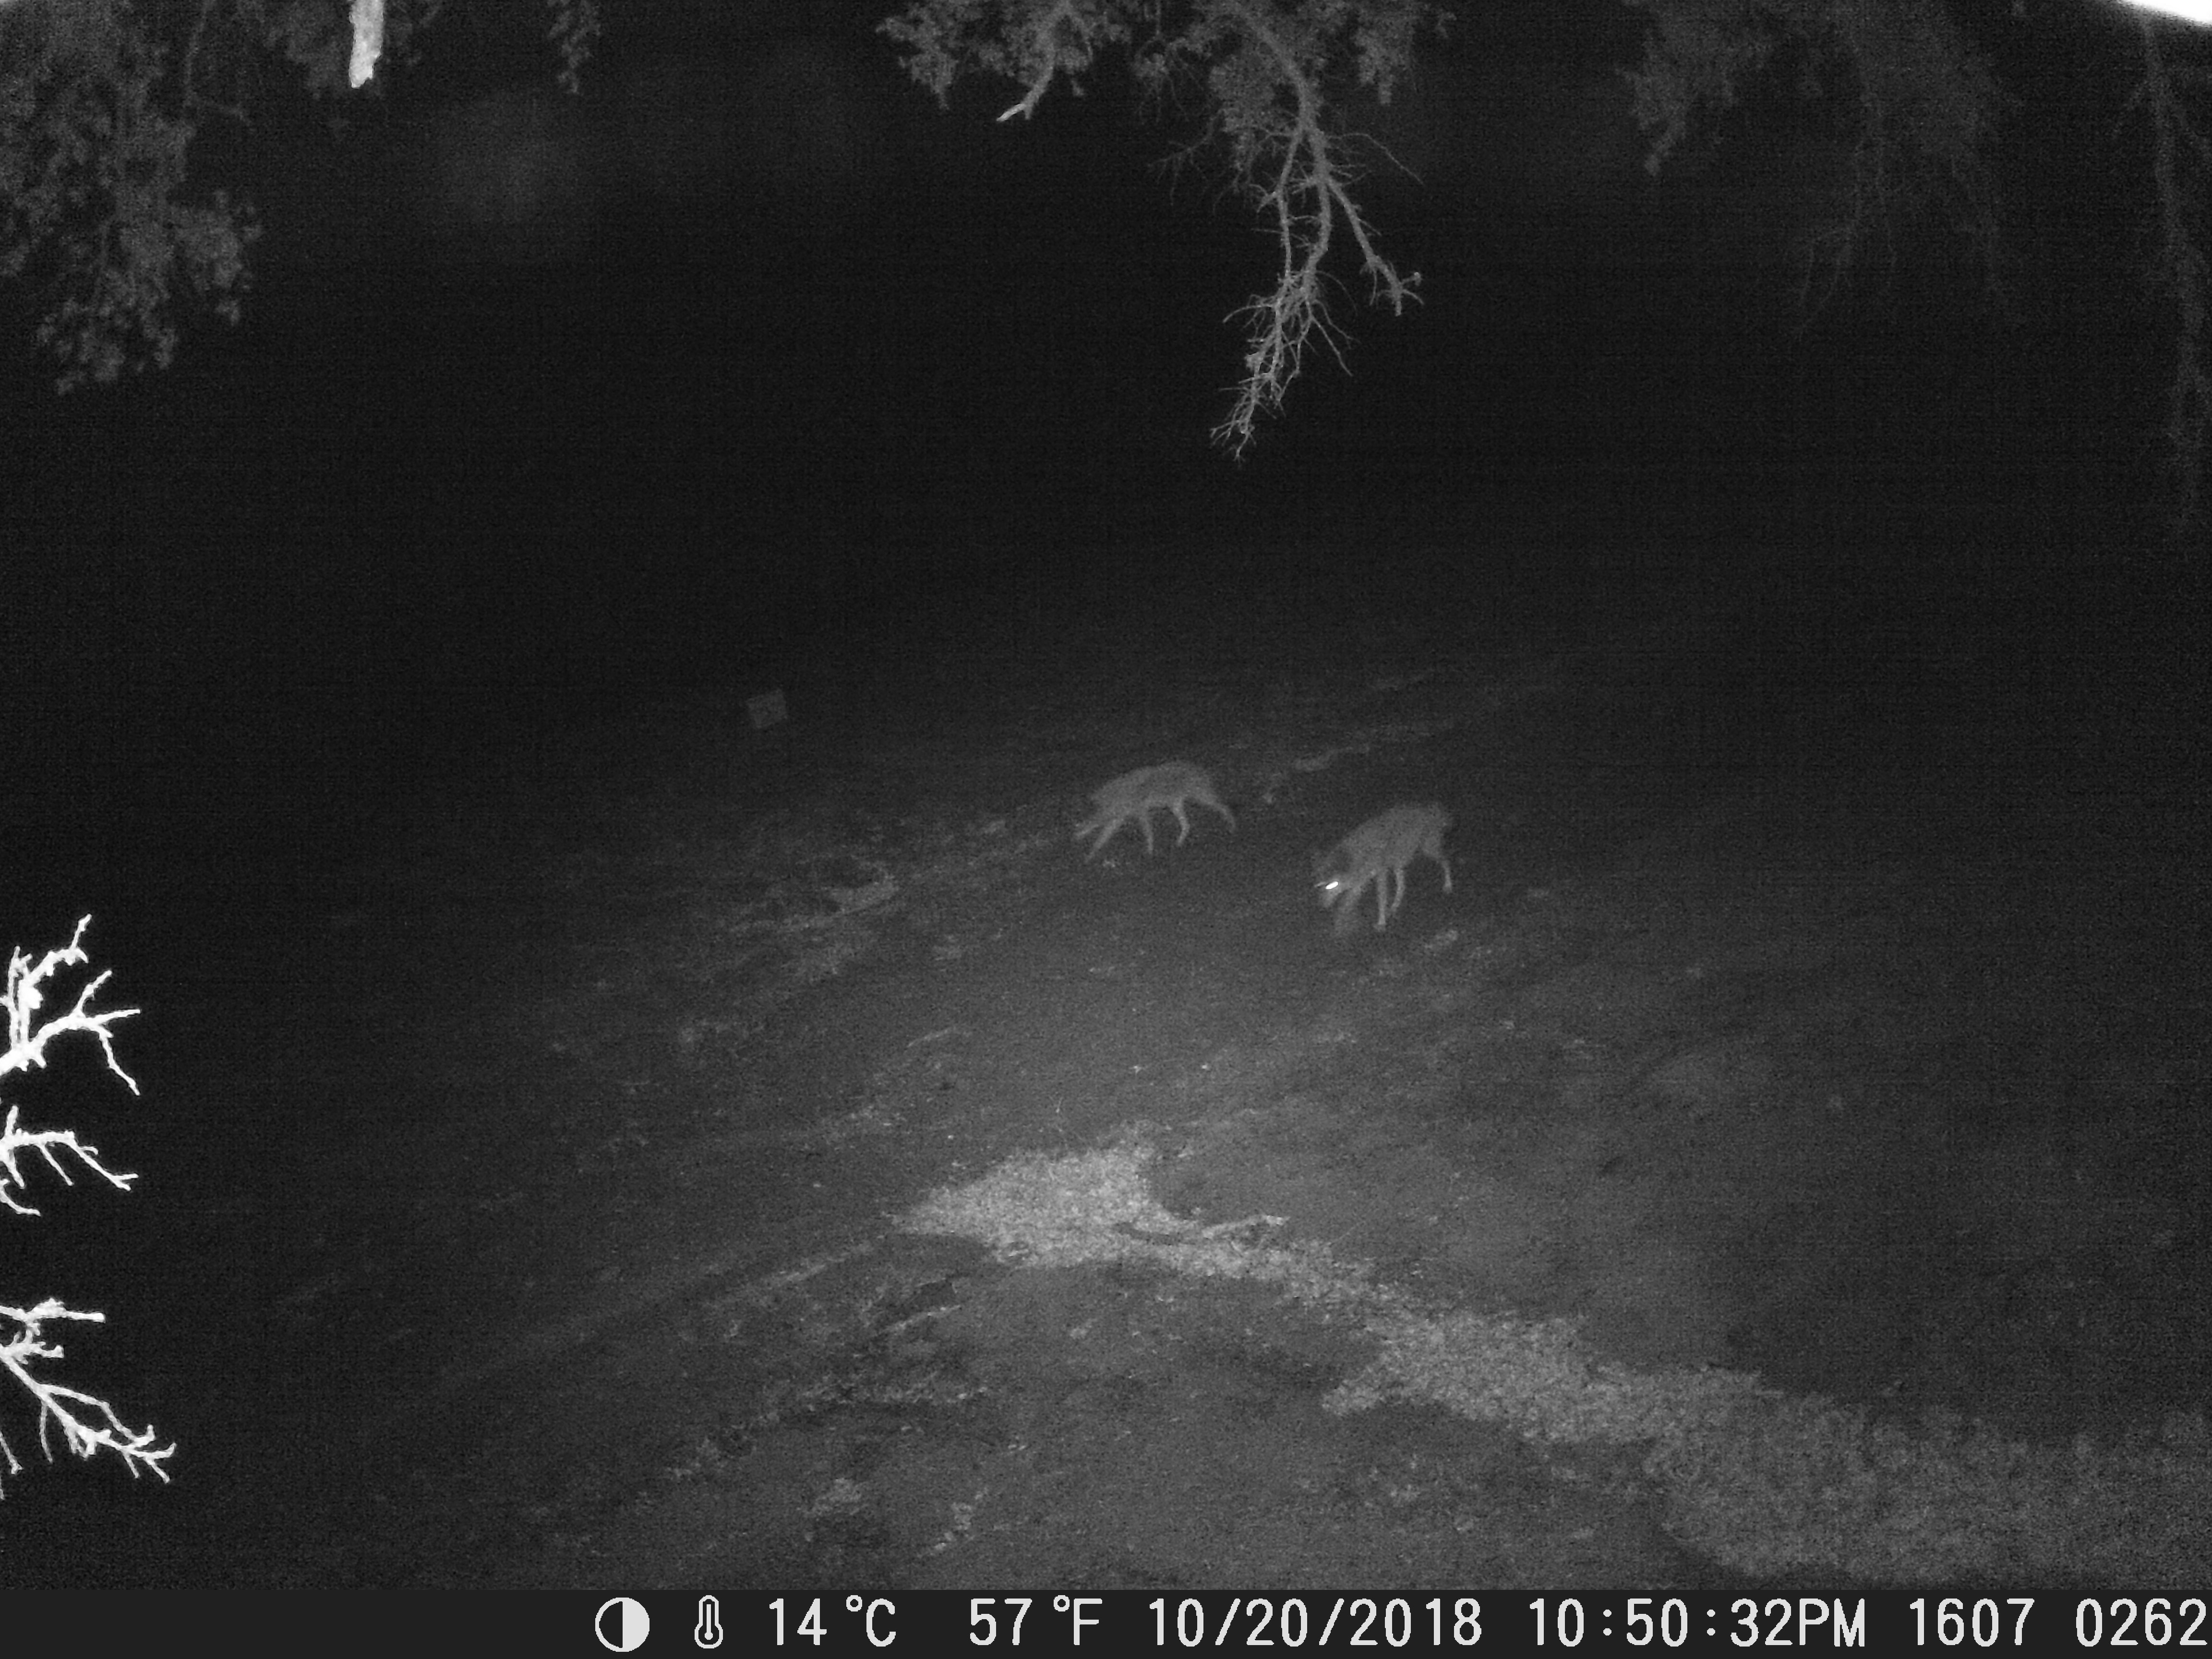 A pair of coyotes